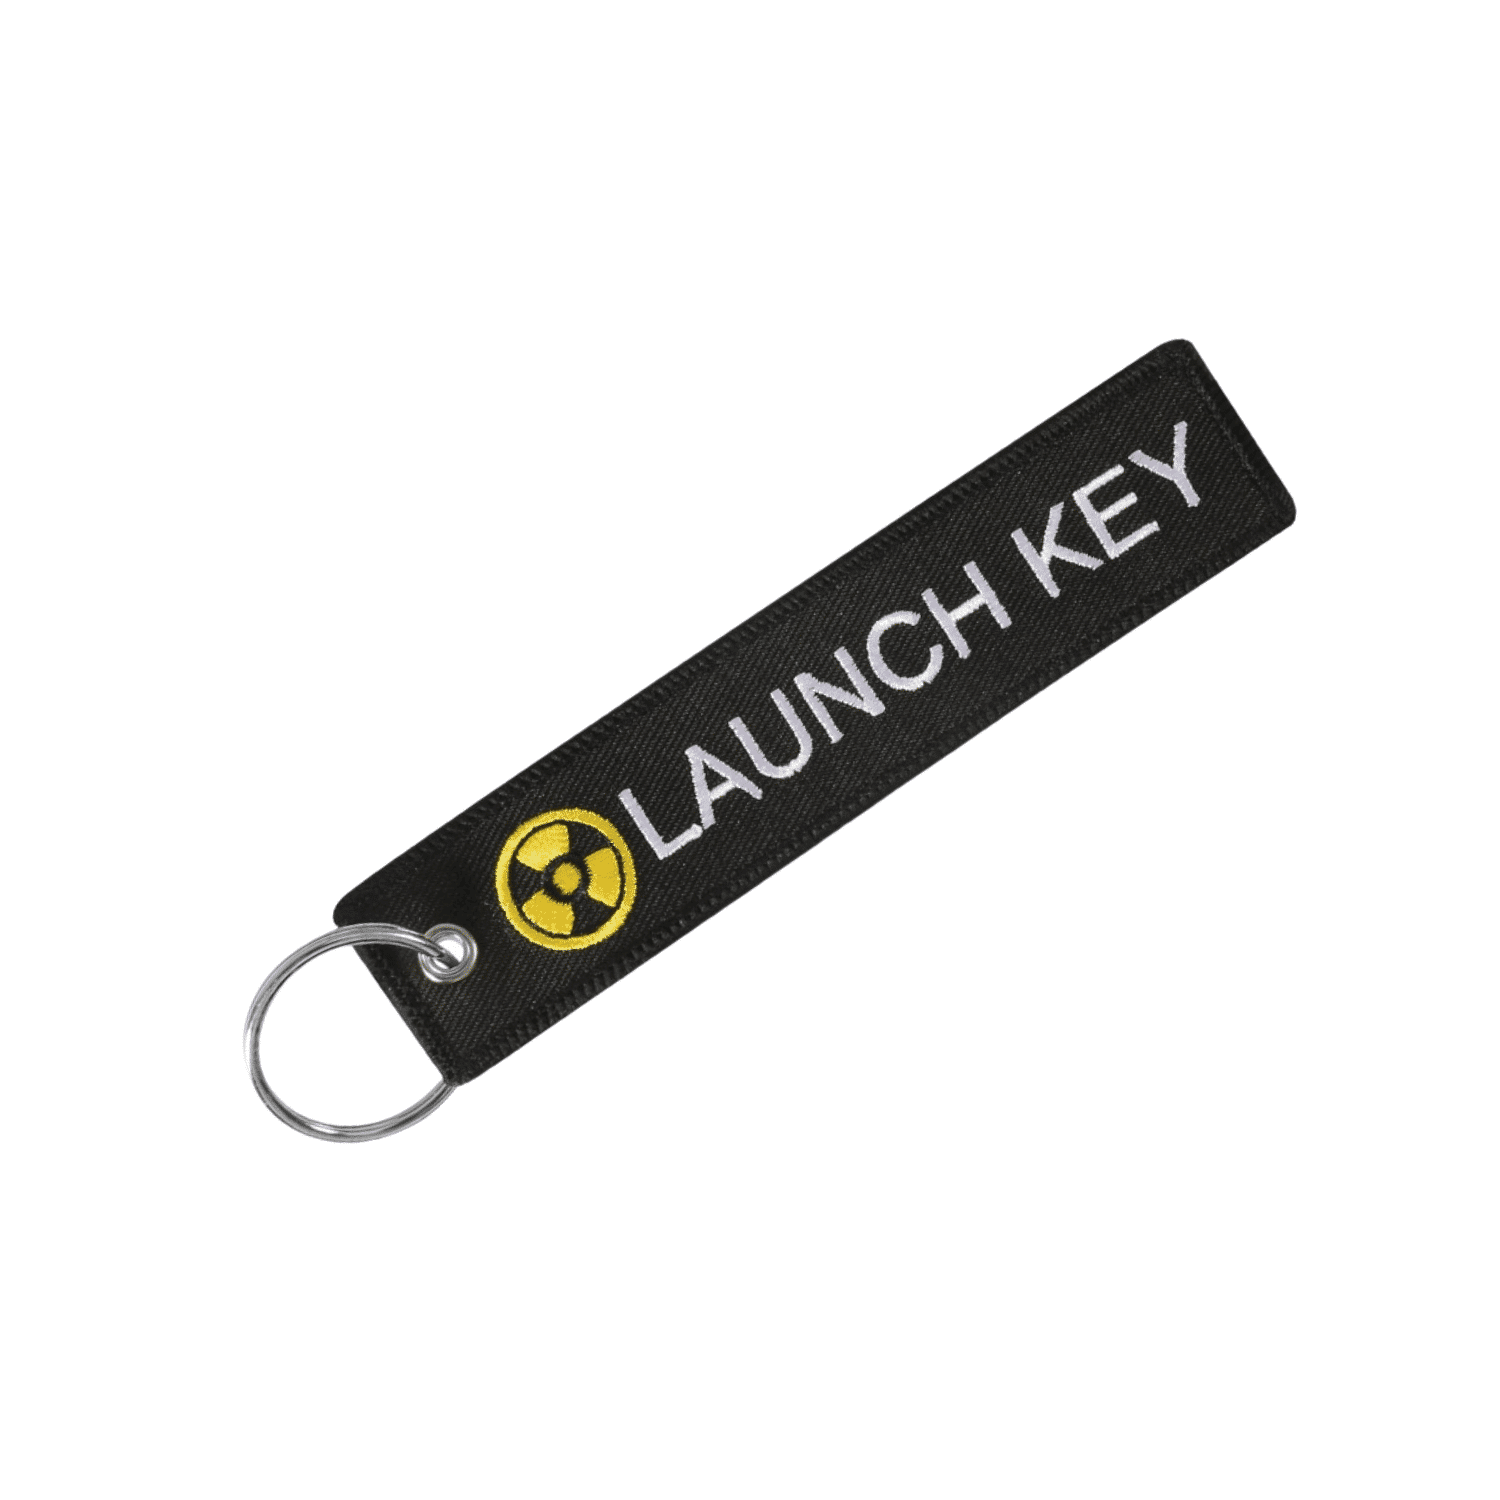 LAUNCH KEY | MOTORCYCLE KEYCHAIN - Riders Lust